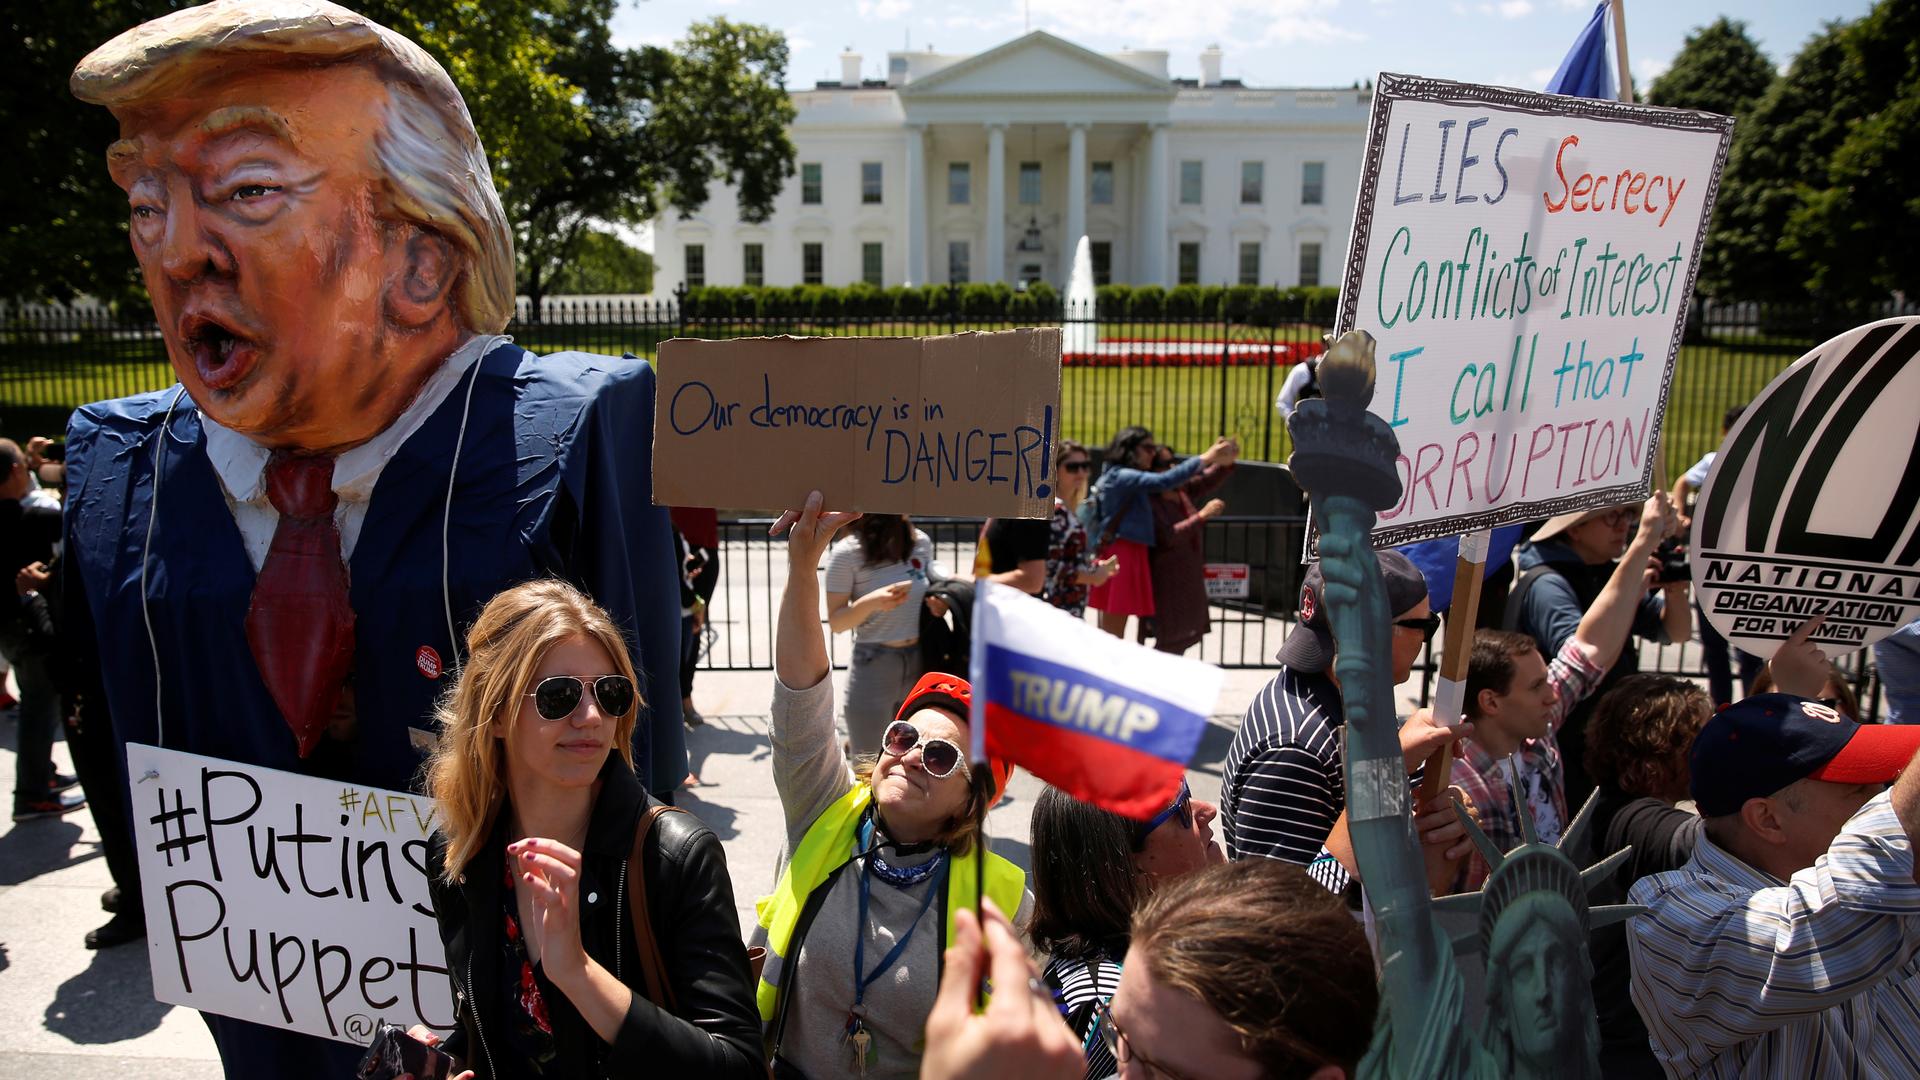 Protesters outside the White House, May 10th 2017. One sign says “Our democracy is in danger.”